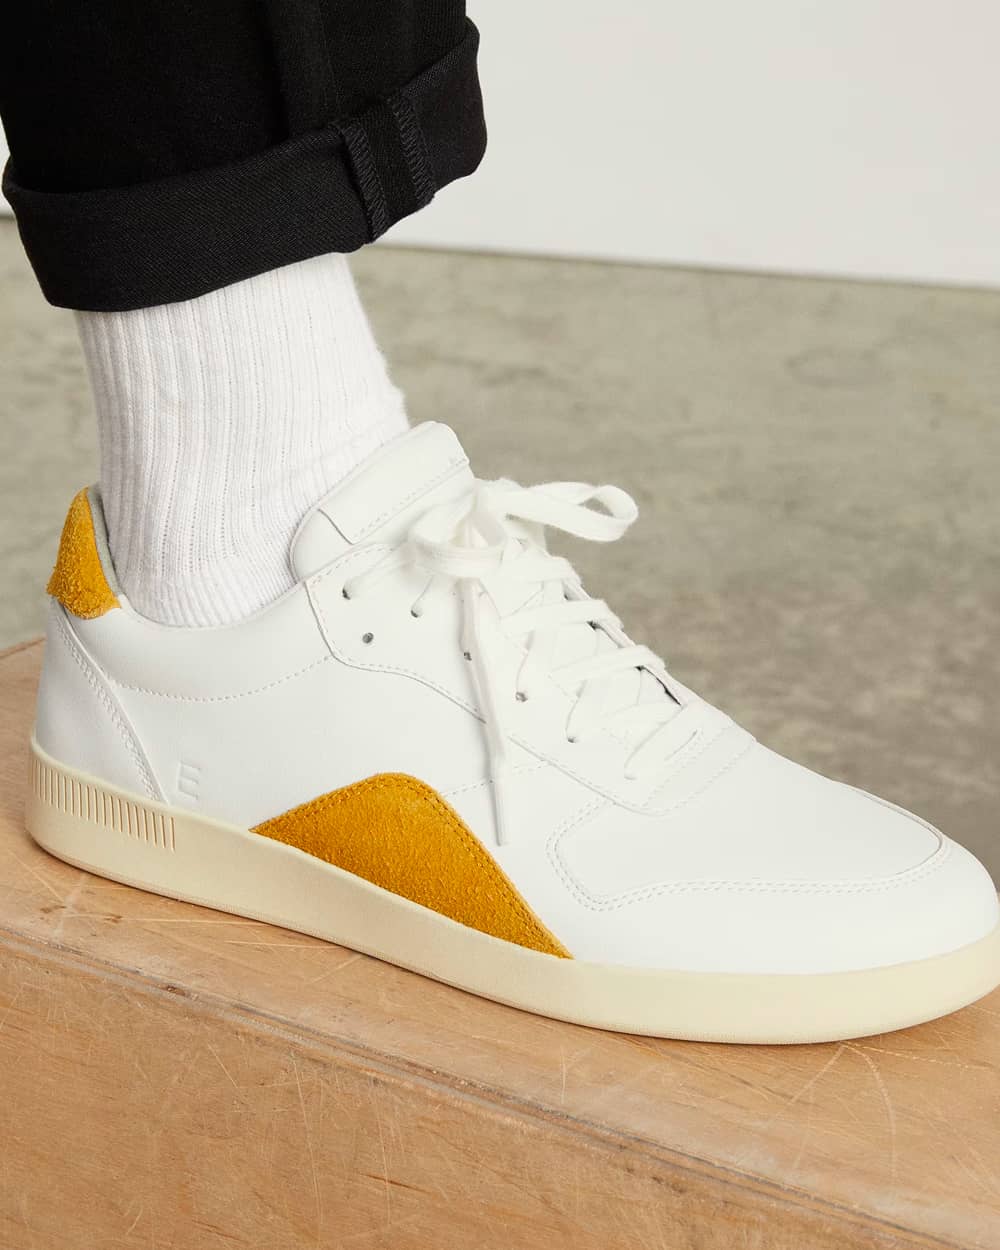 Everlane The ReLeather Court Sneakers in white and yellow worn on feet with white socks and black pants